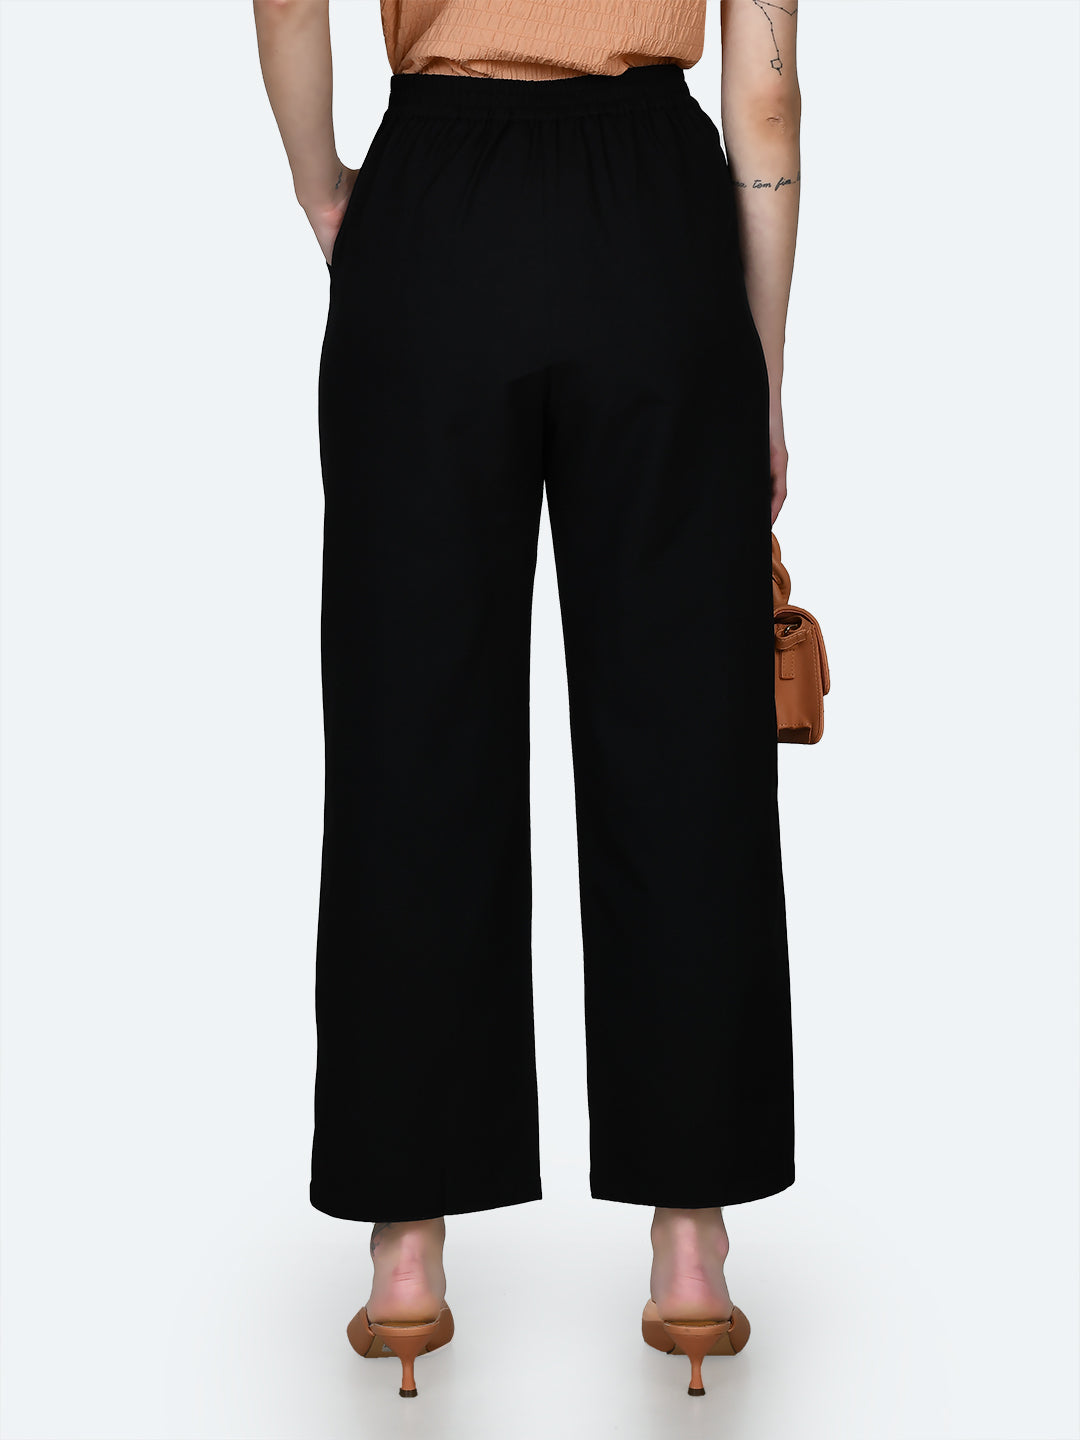 Black Solid Trousers For Women